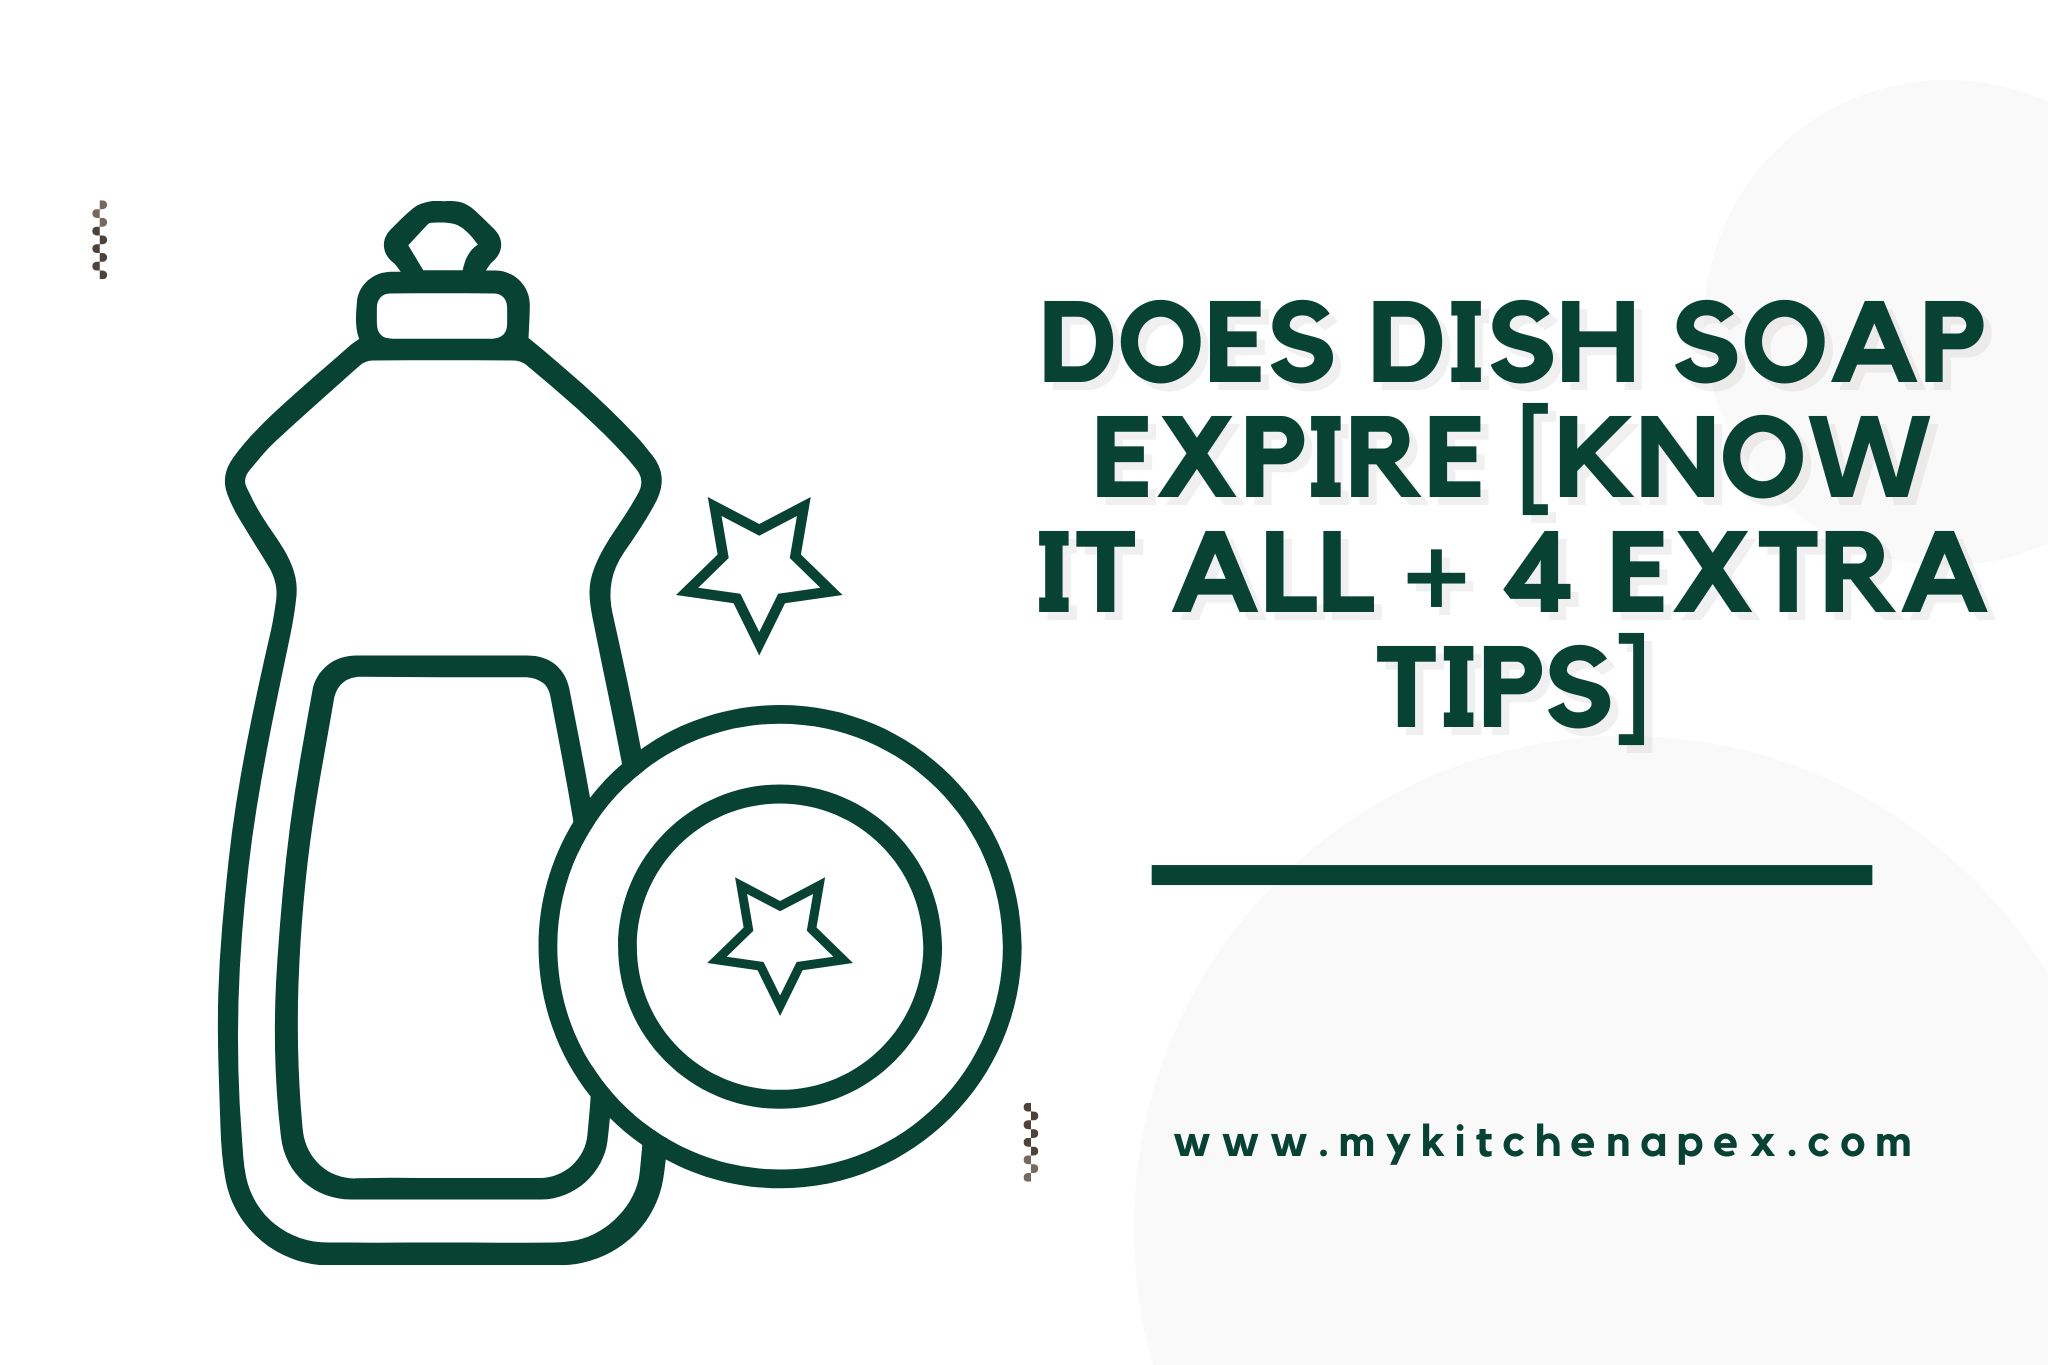 Does Dish Soap Expire [Know It All + 4 EXTRA Tips]